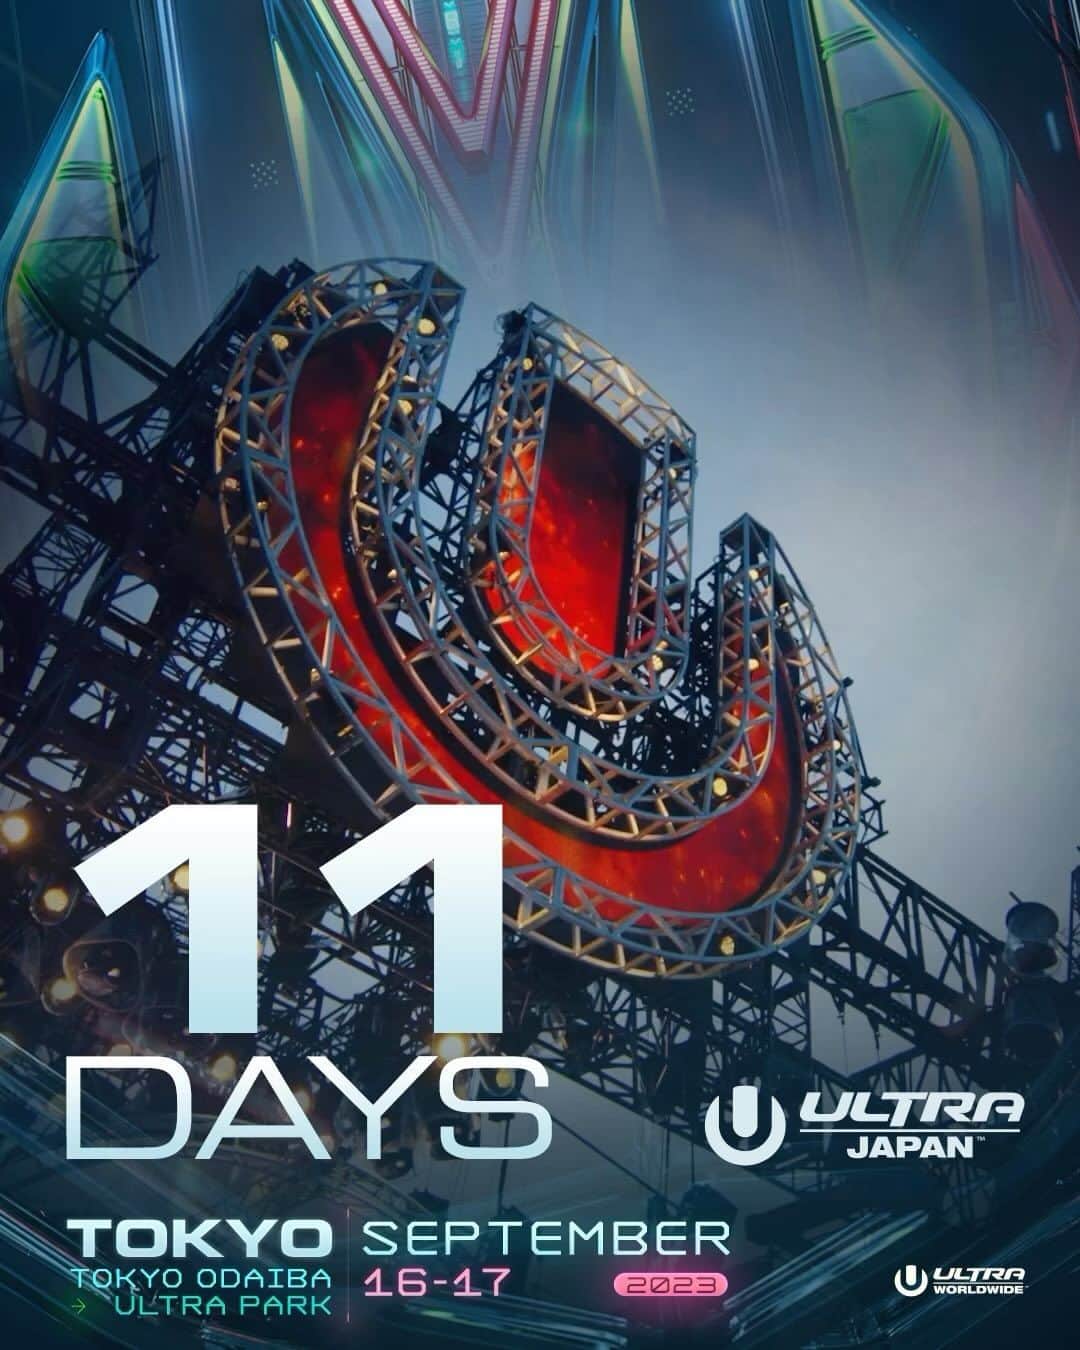 Ultra Japanのインスタグラム：「もうすぐULTRA JAPAN！ あと11日で、最高の音楽と仲間に会える🎶🙌 1 DAY TICKET 好評発売中‼️💨  👇TICKETS👇 >> @ultrajapan  ULTRA JAPAN is coming soon! Only 11 more days to see the best music and friends!🎶🙌  👇TICKETS👇 >> @ultrajapan  #UltraJapan #UltraJapan2023 #ウルトラジャパン」